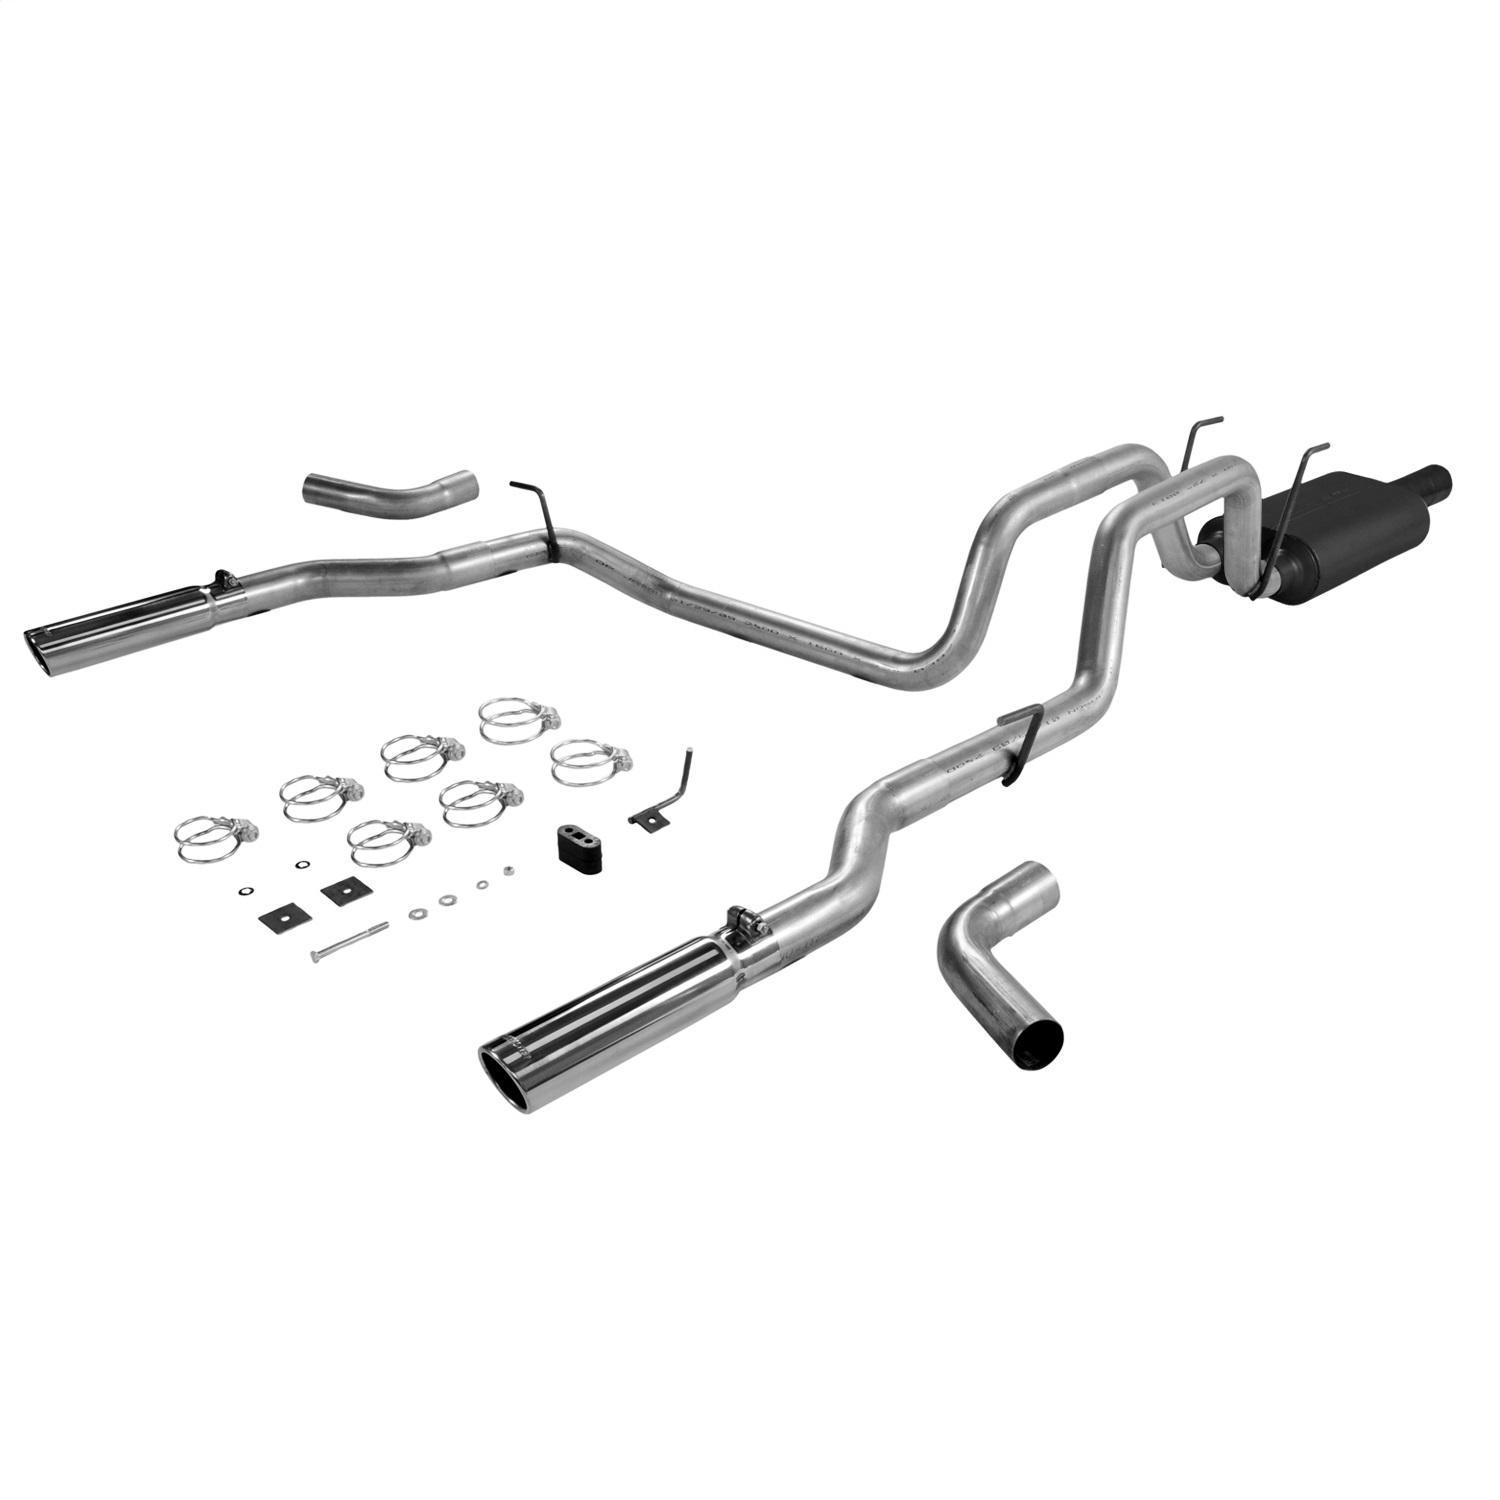 Flowmaster Flowmaster 817424 American Thunder Cat Back Exhaust System Fits 06-08 Ram 1500